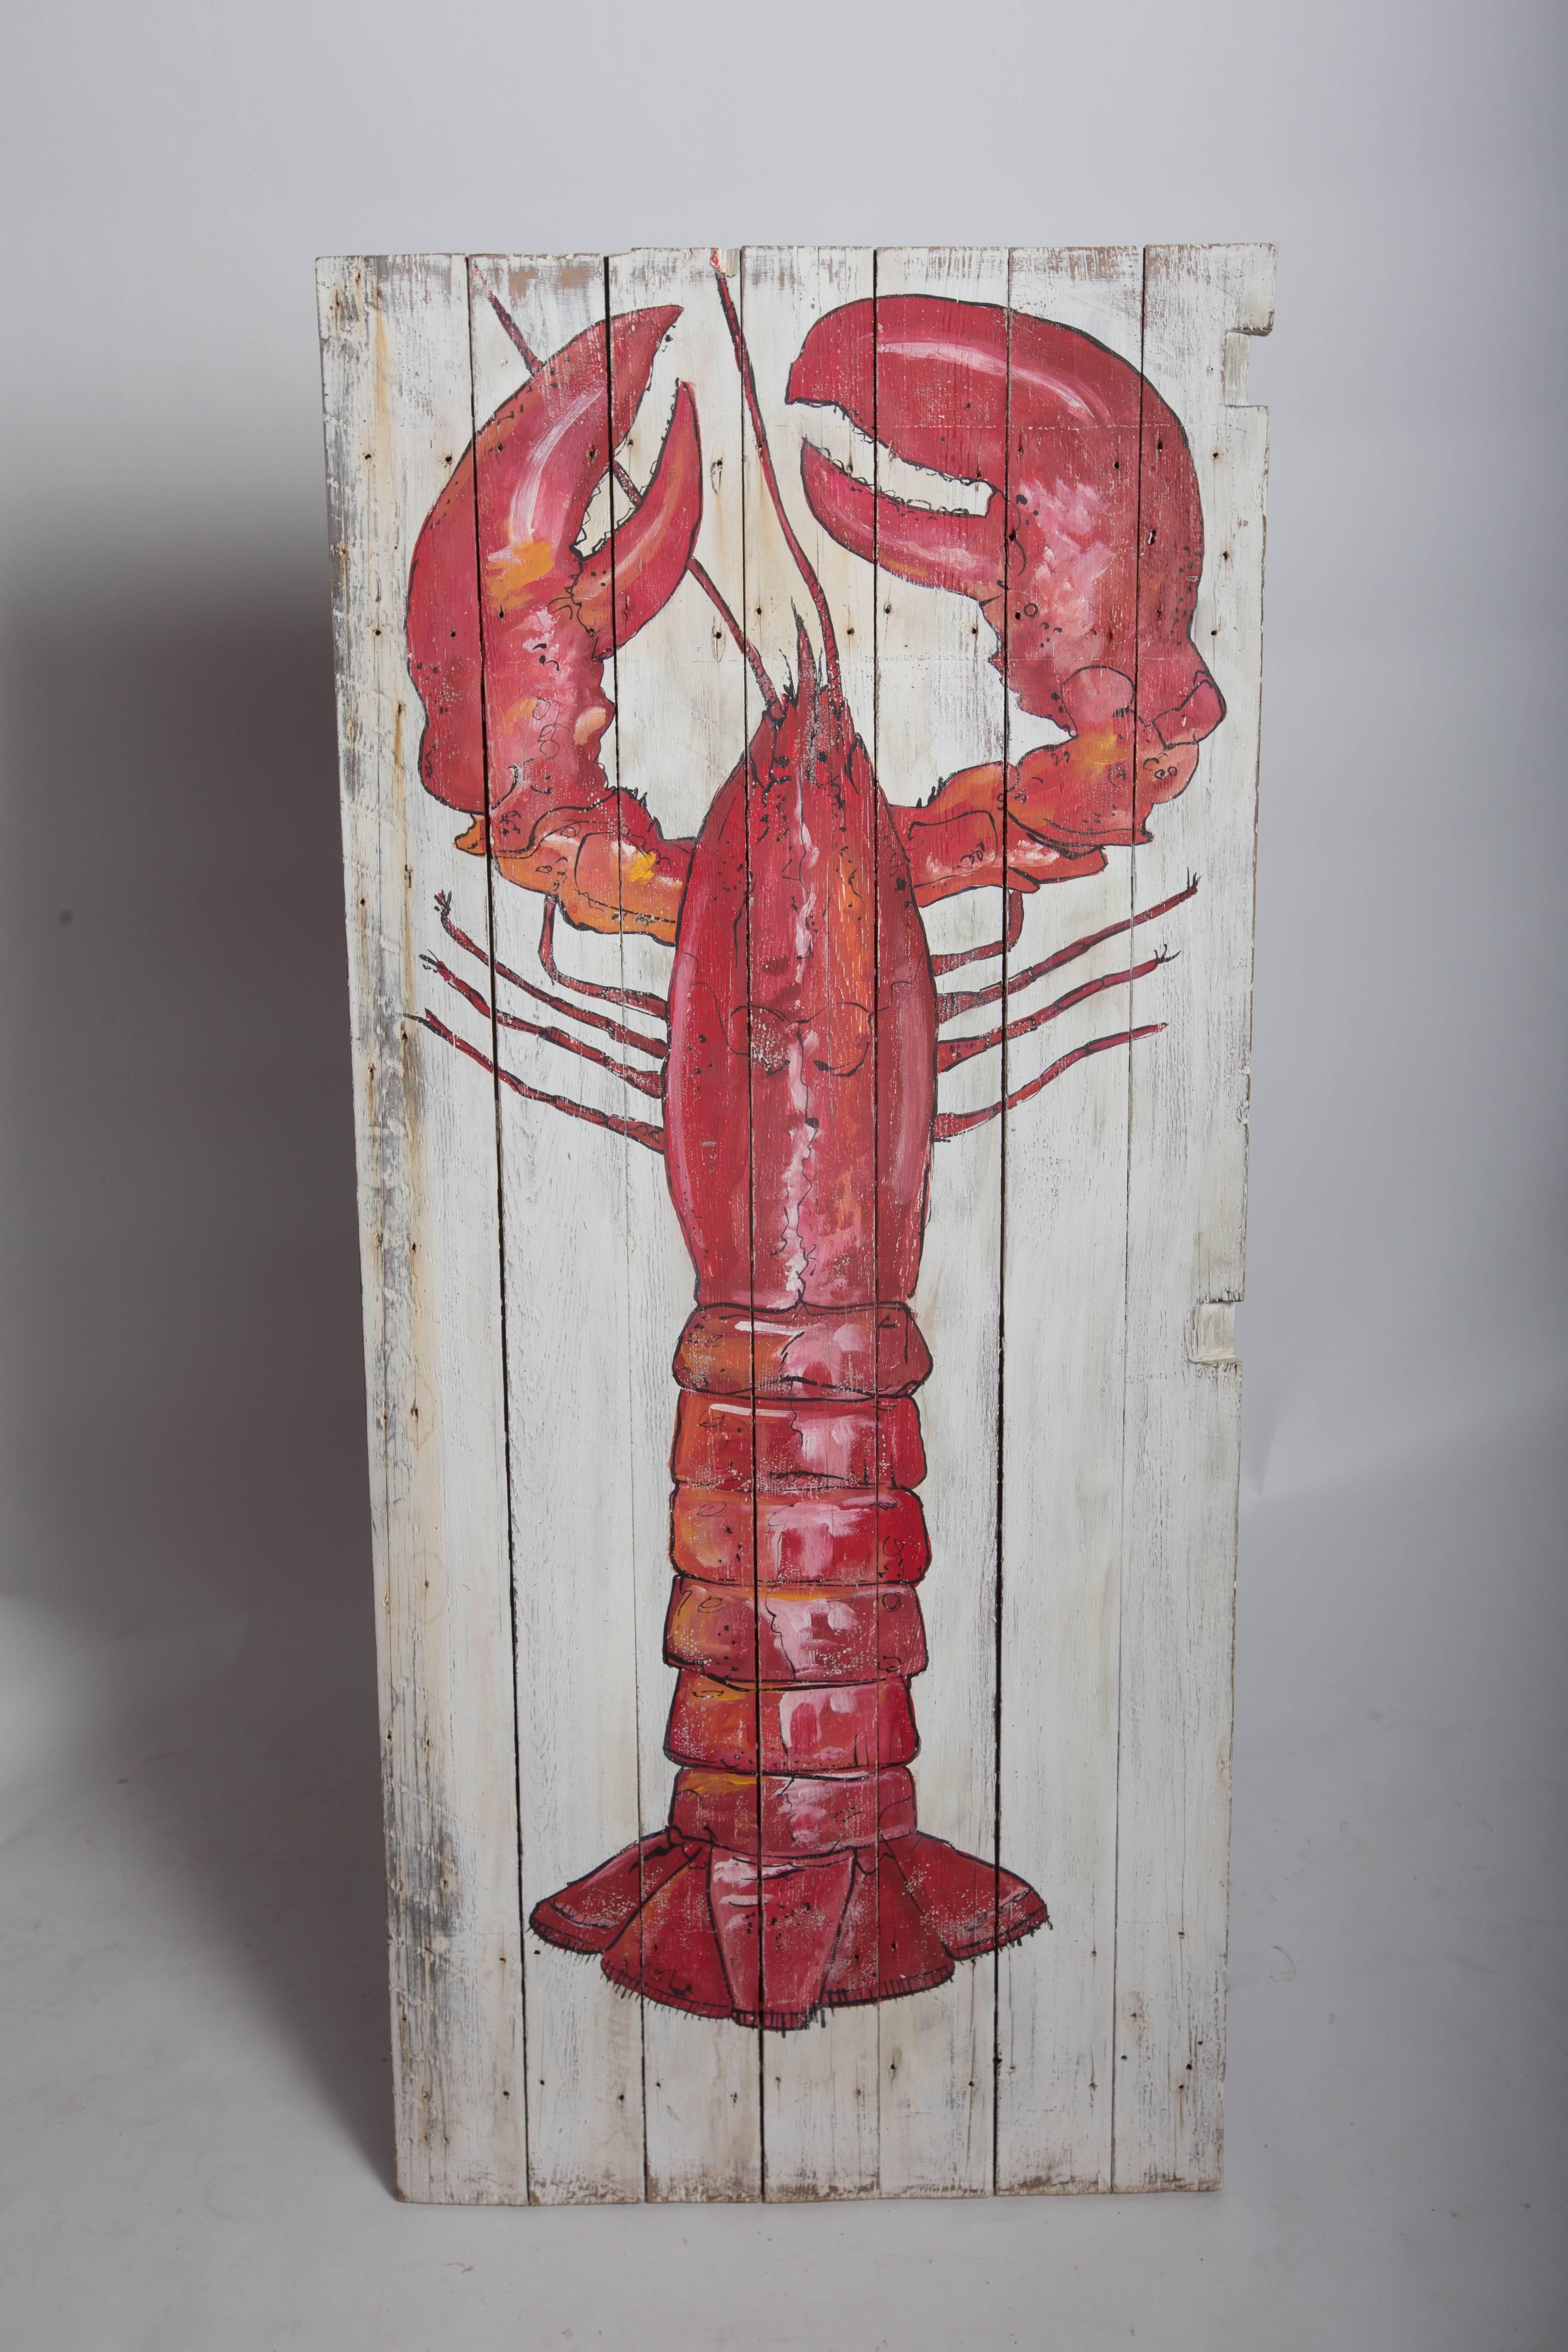 Contemporary Folk Art painted door with a large lobster theme by Midcoast Maine artist.